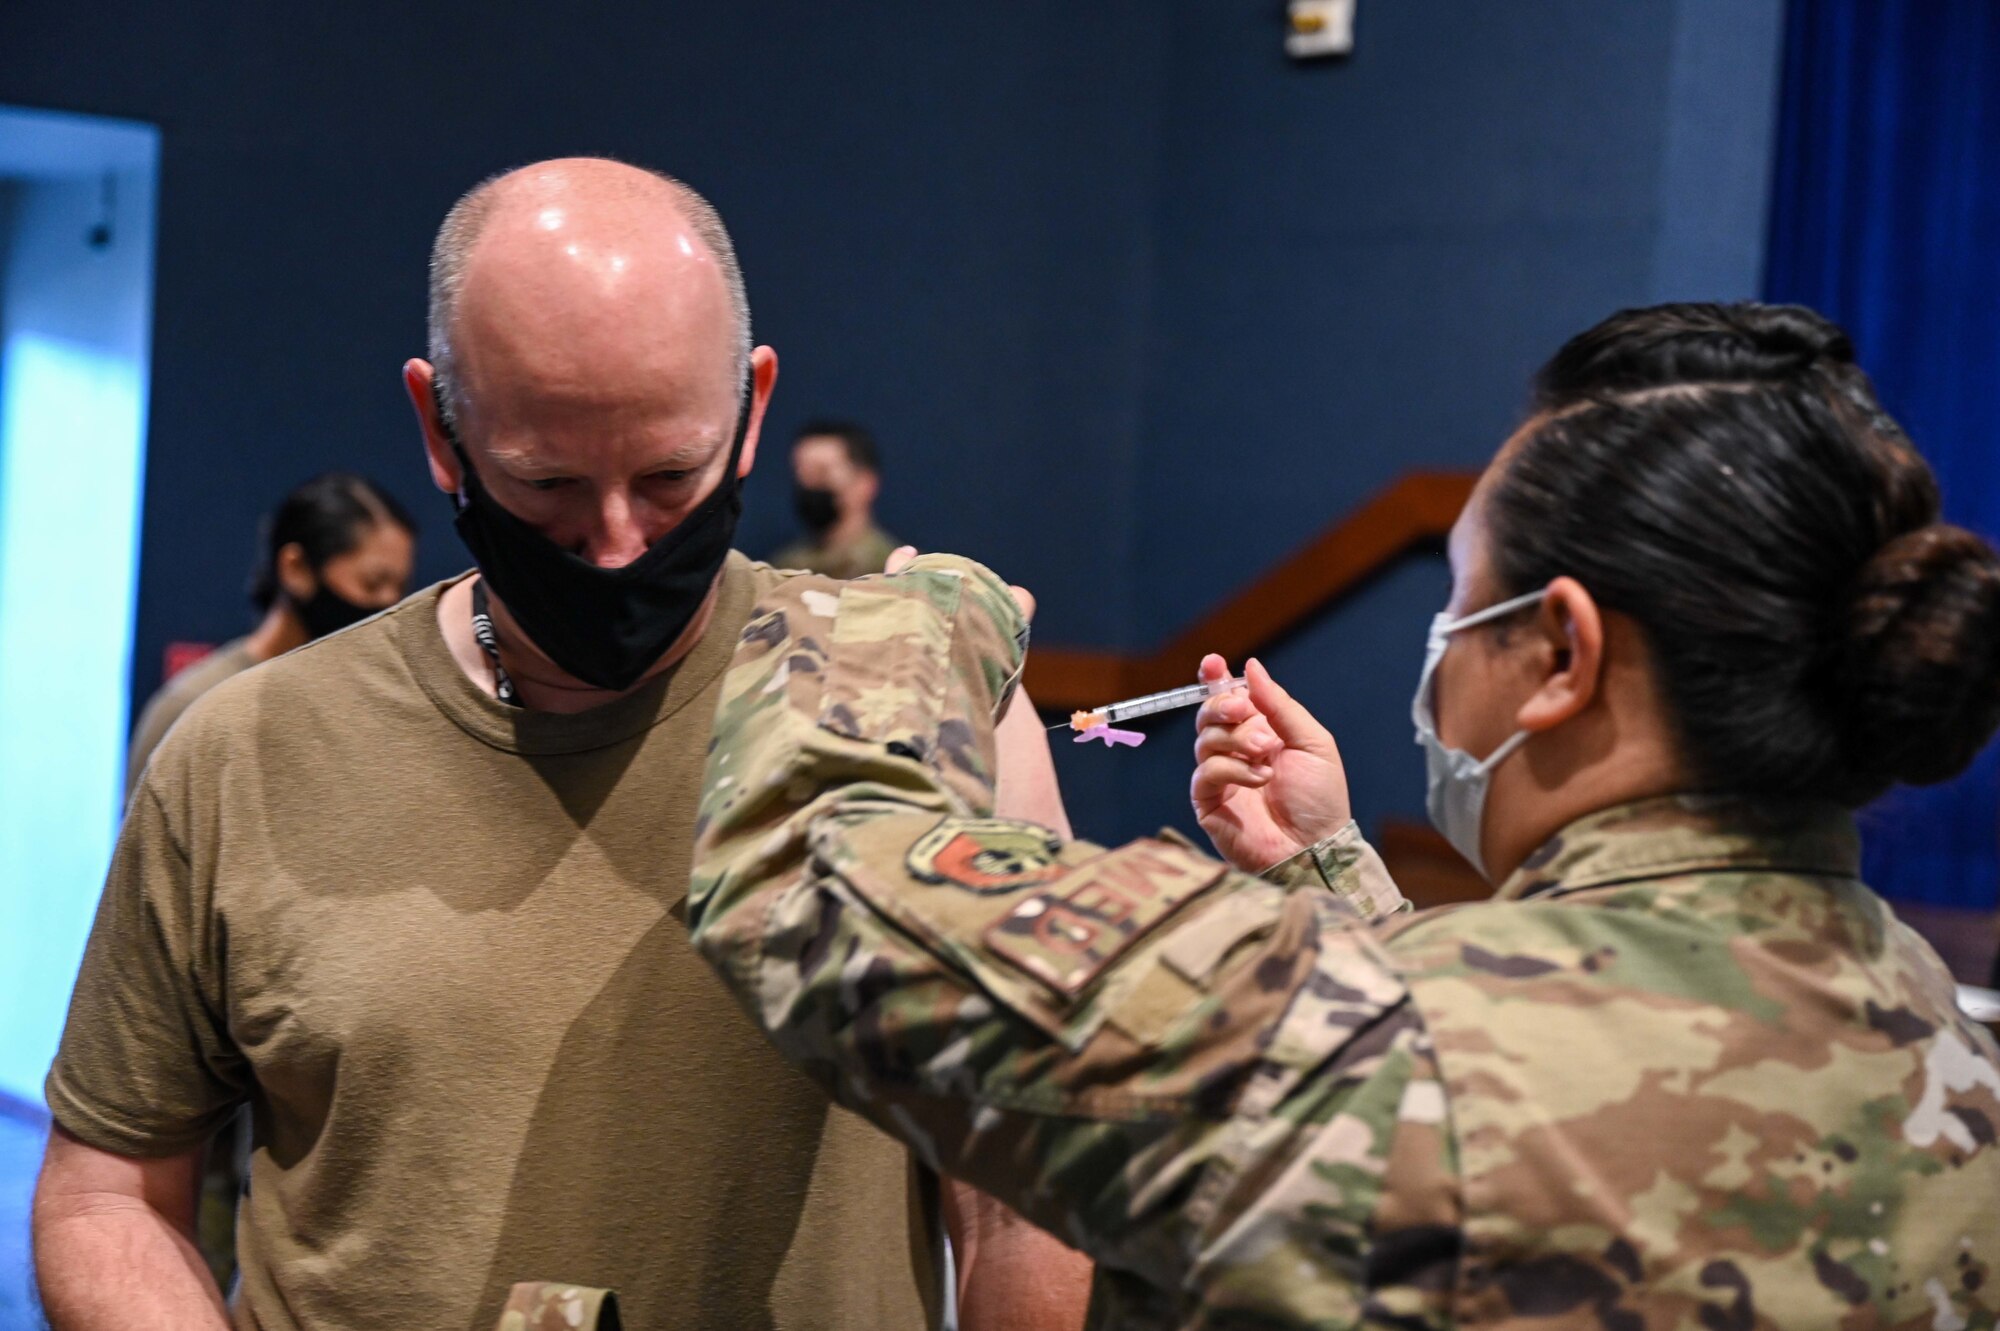 Brig. Gen. Stephen Purdy, 45th Space Wing Commander, recieves a COVID-19 vaccine at Patrick Space Force Base, Fla., Jan. 14, 2021. The 45th Medical Group administered the first round of the vaccine in accordance with the Department of Defense's COVID-19 vaccine distribution plan. (U.S. Space Force Photo By Airman First Class Thomas Sjoberg)